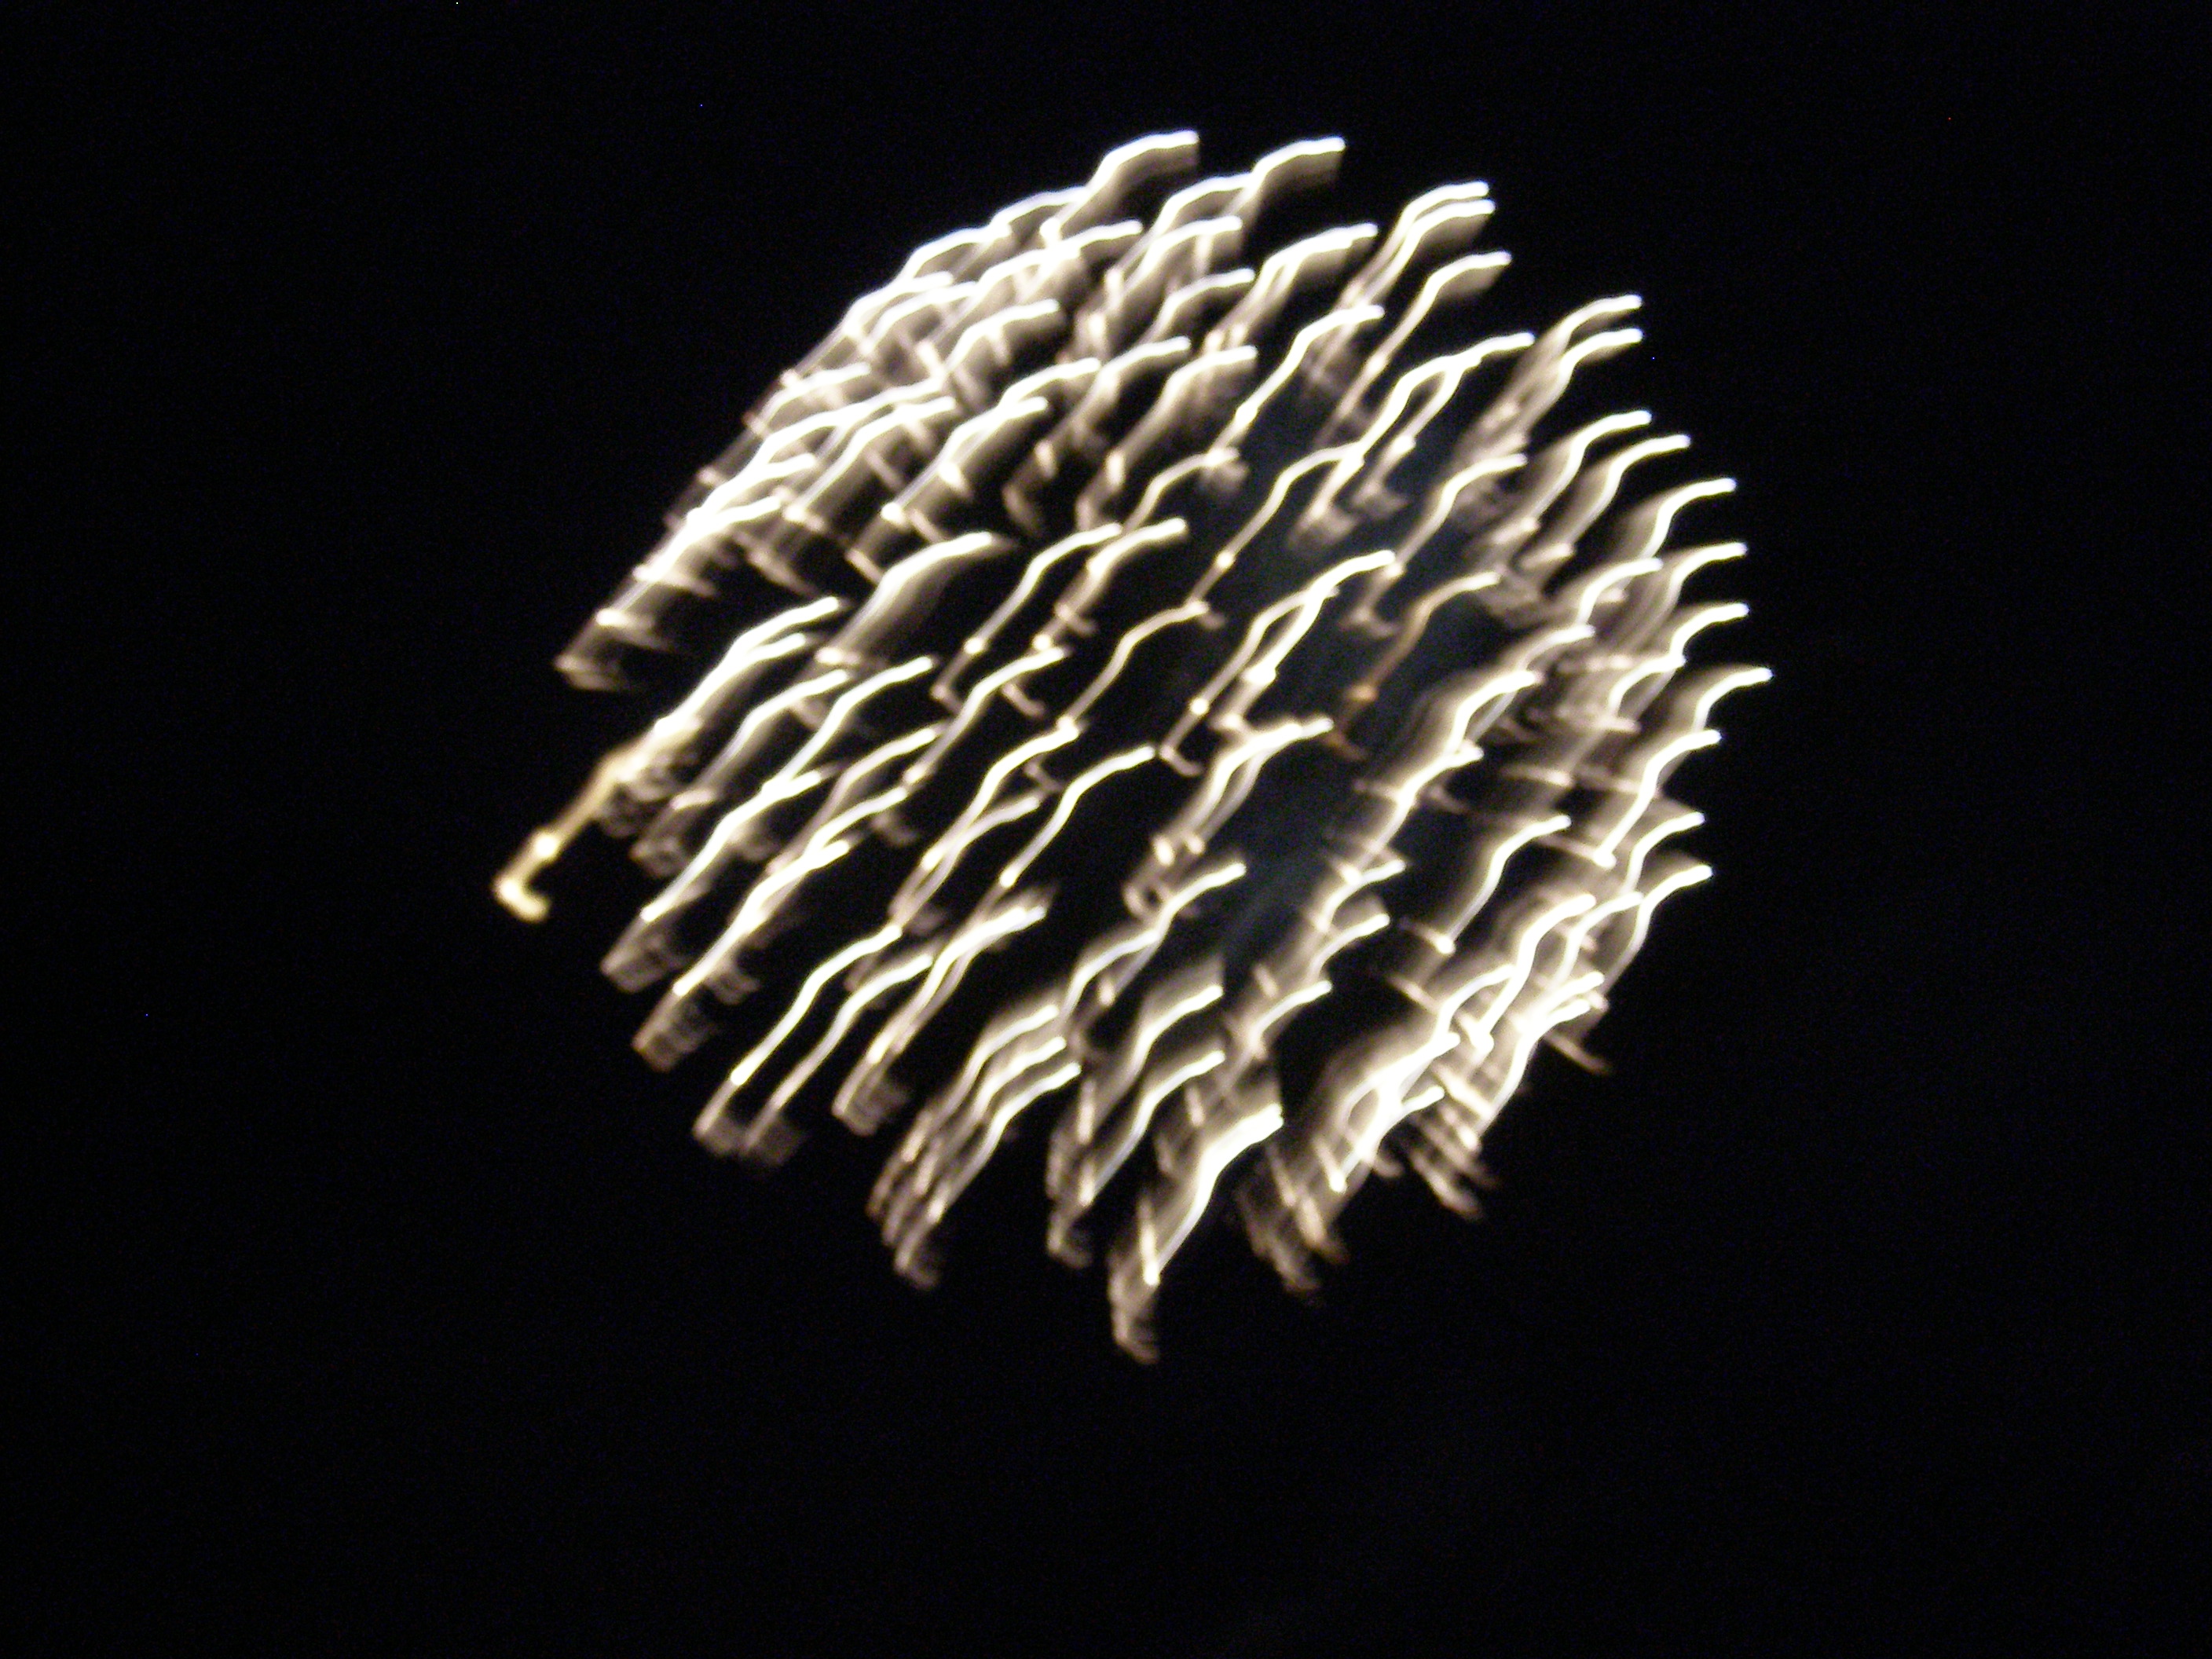 Fire works 2 photo